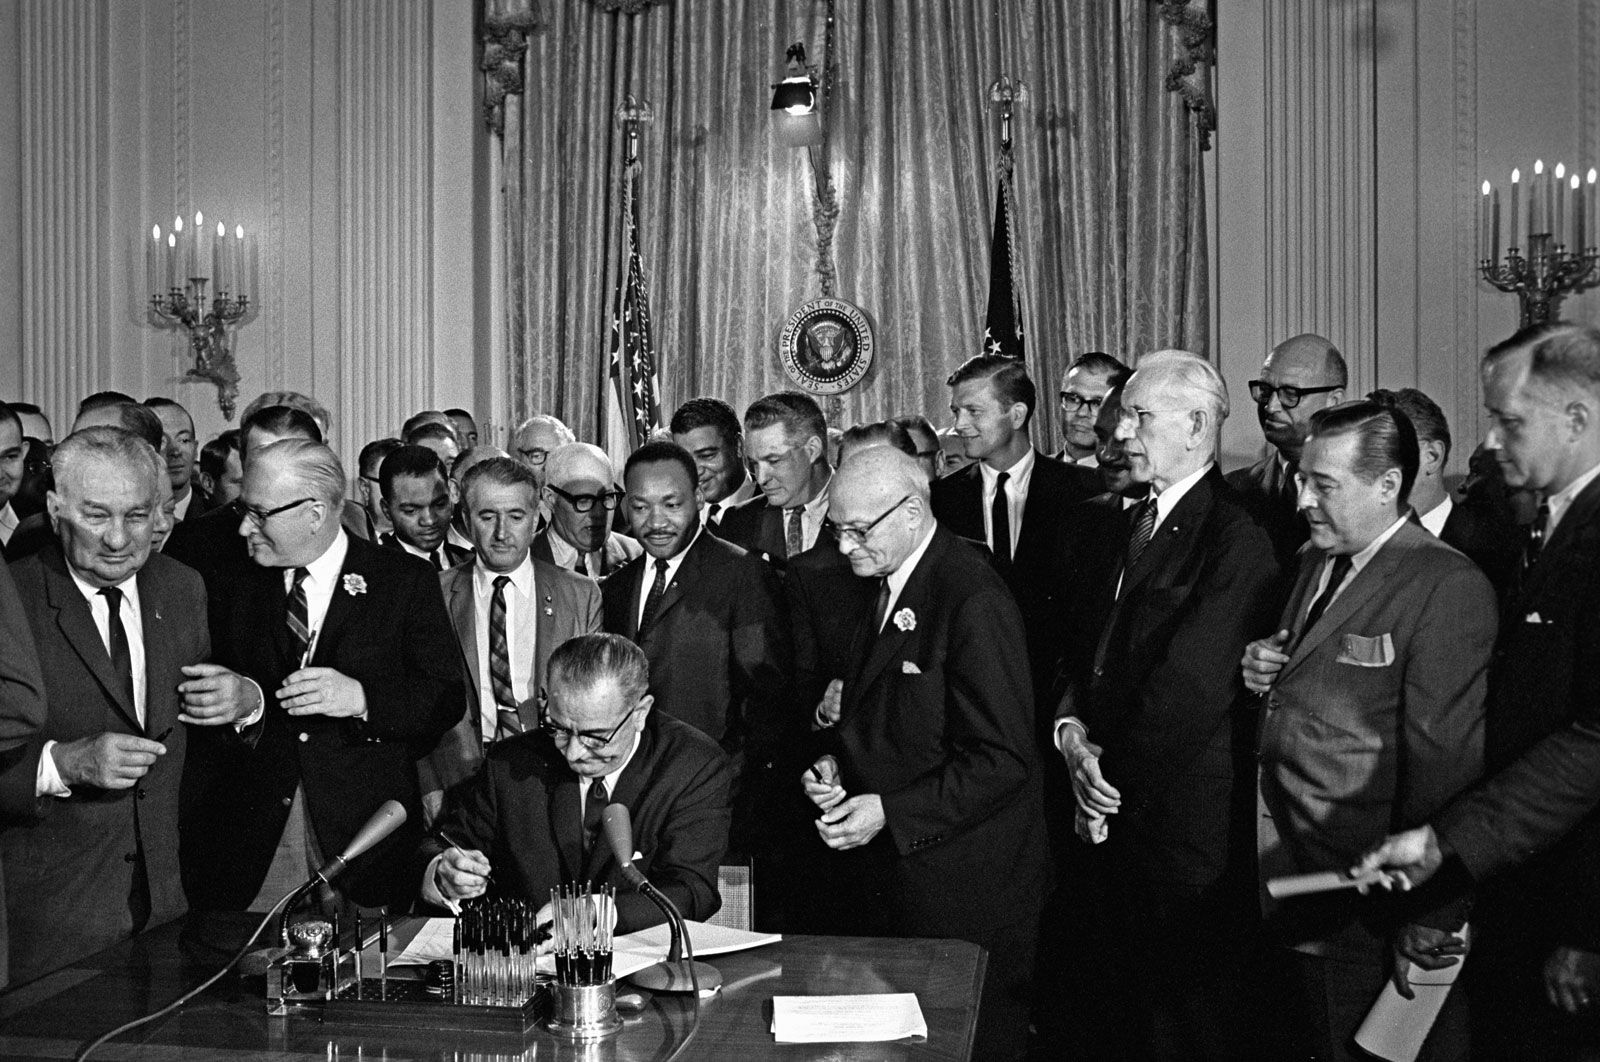 U.S. Pres. Lyndon B. Johnson signing the 1964 Civil Rights Act as Martin Luther King, Jr., and others look on, Washington, D.C., July 2, 1964